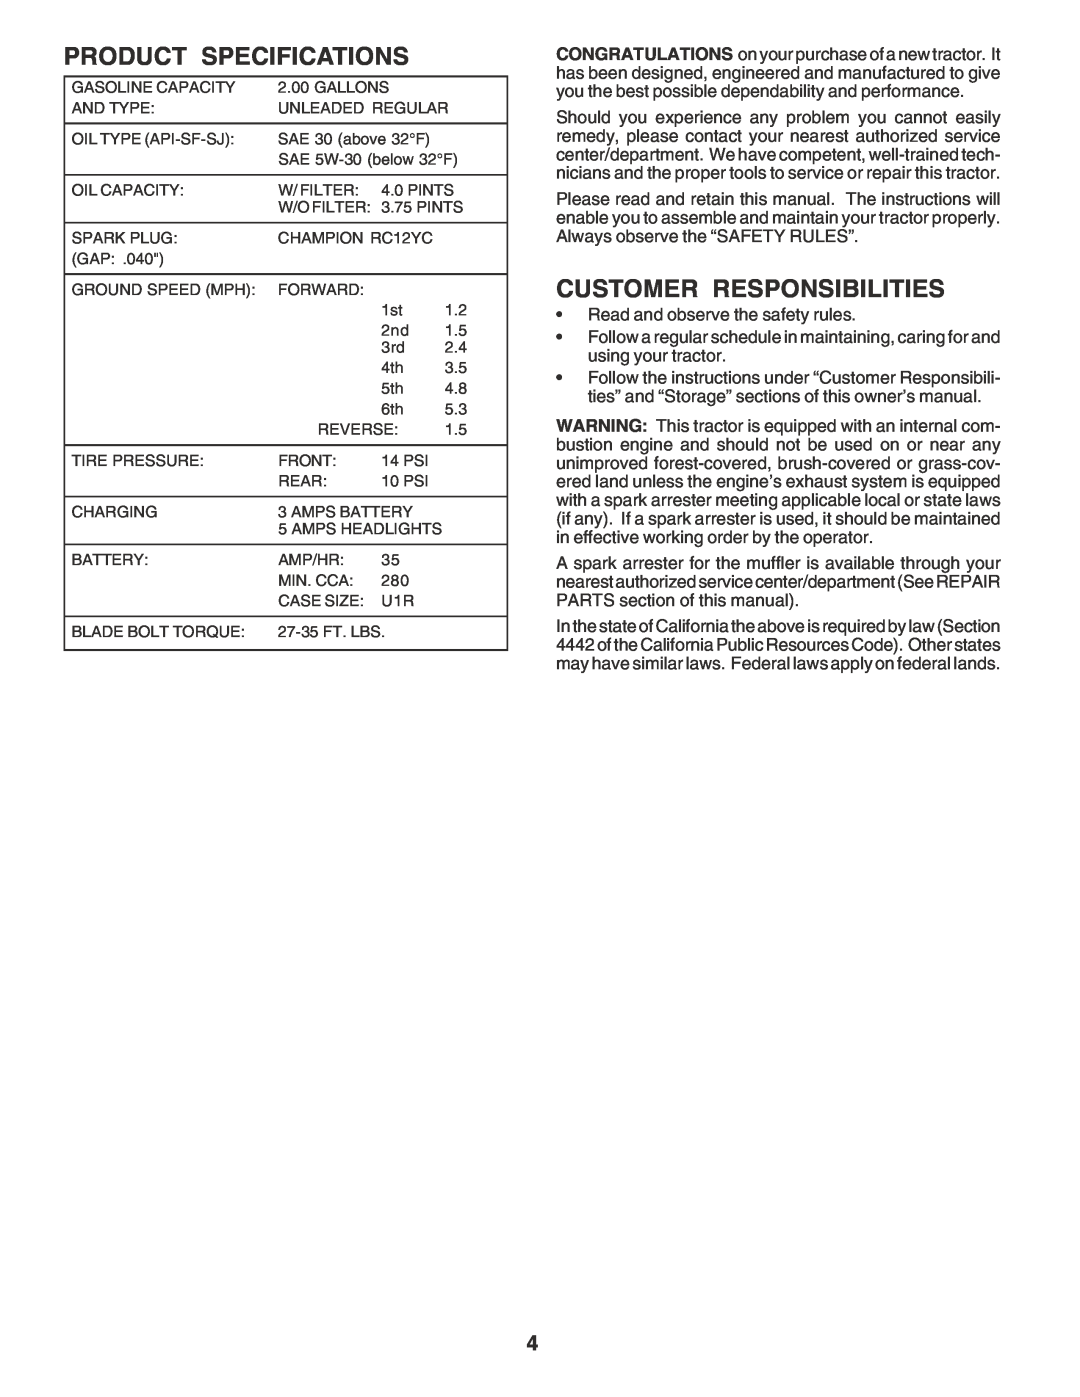 Poulan 180196 owner manual Product Specifications, Customer Responsibilities 